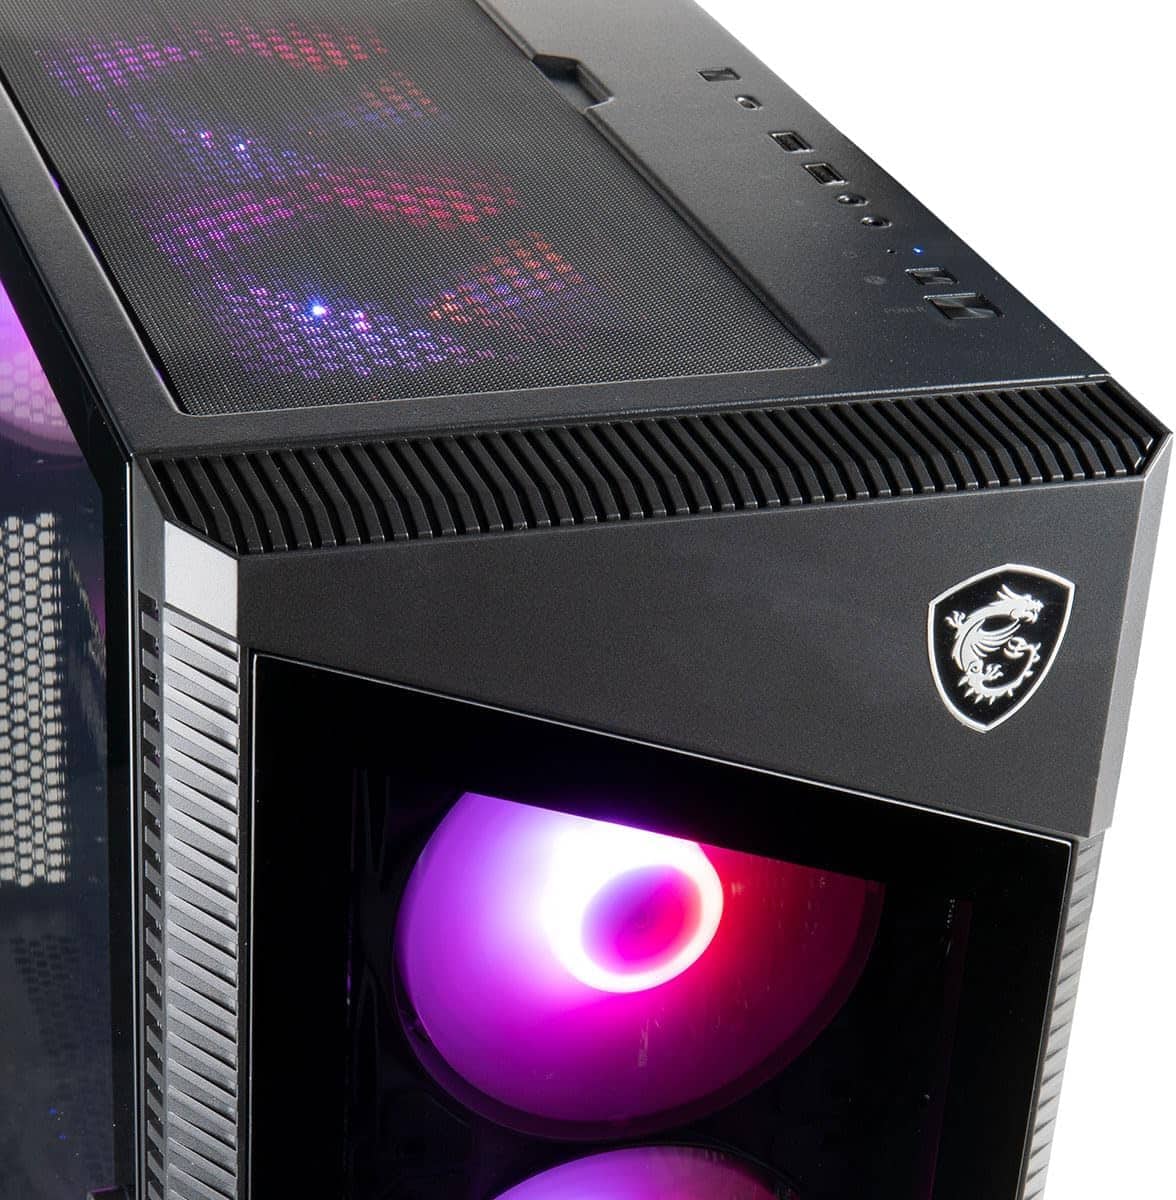 Close-up of an MPG Velox MSI Gaming Desktop with RGB lighting and a visible cooling fan through a transparent panel.